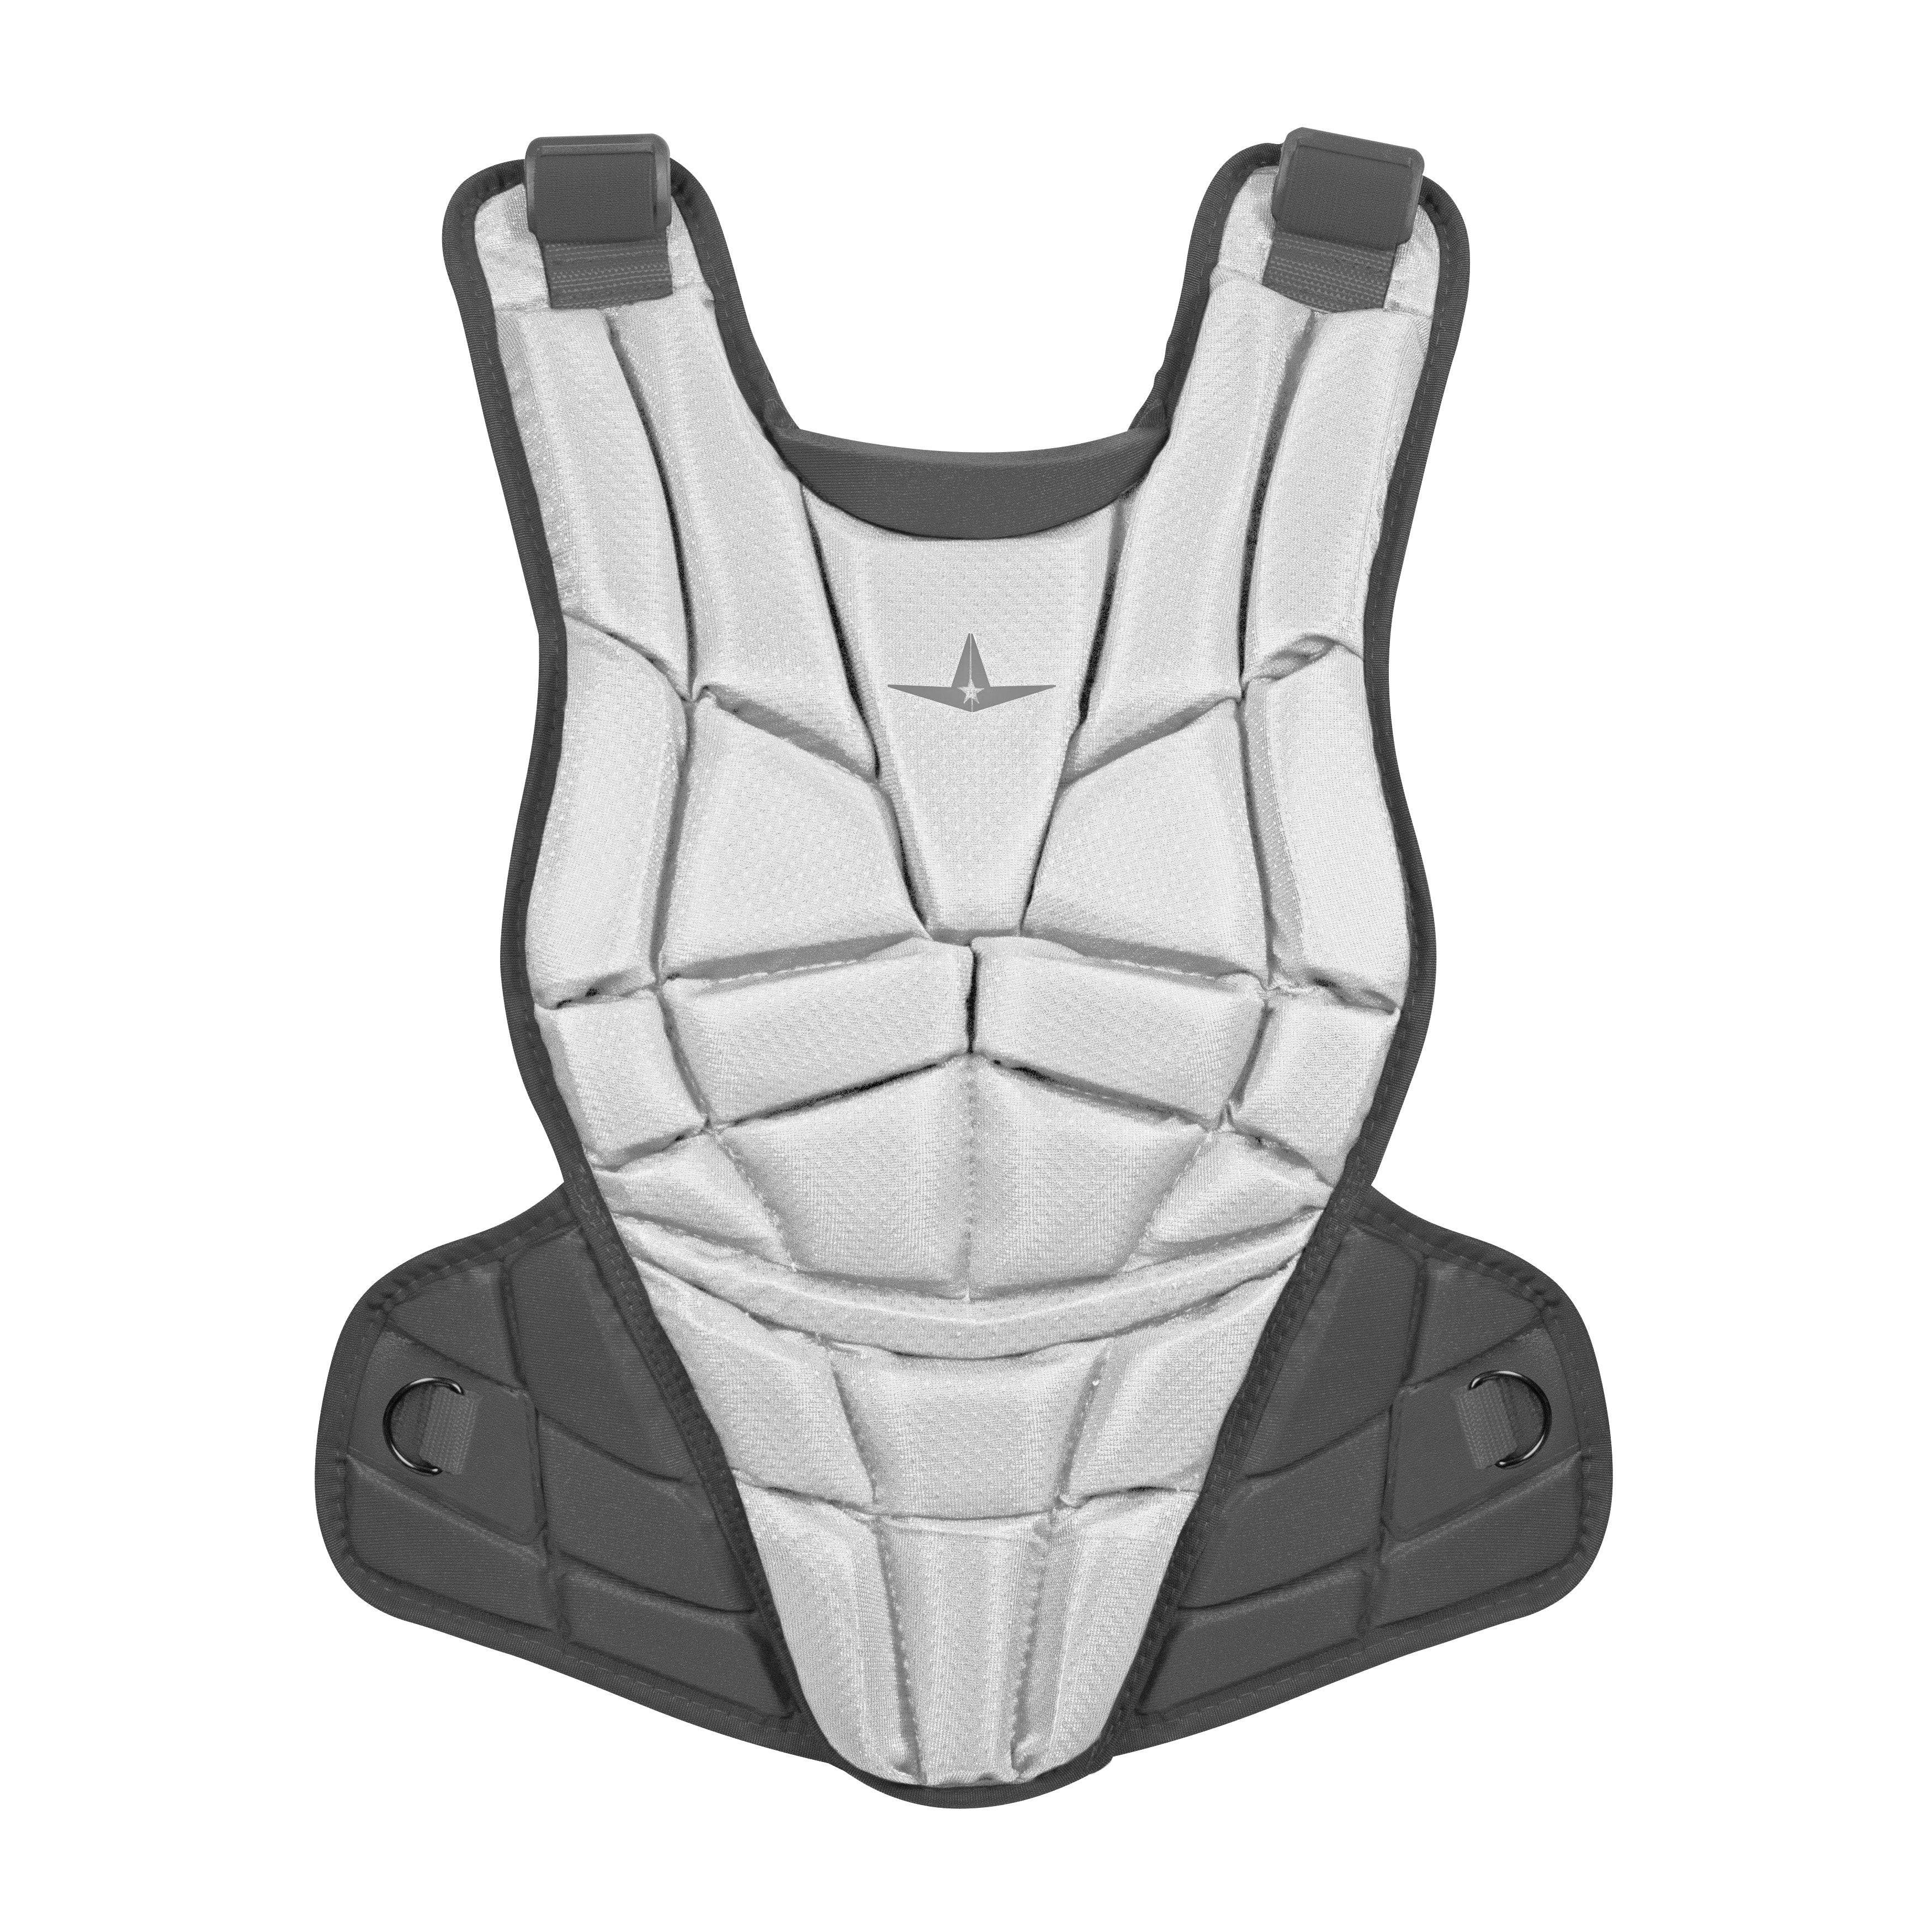 All-Star AFx Elite Fastpitch Chest Protector